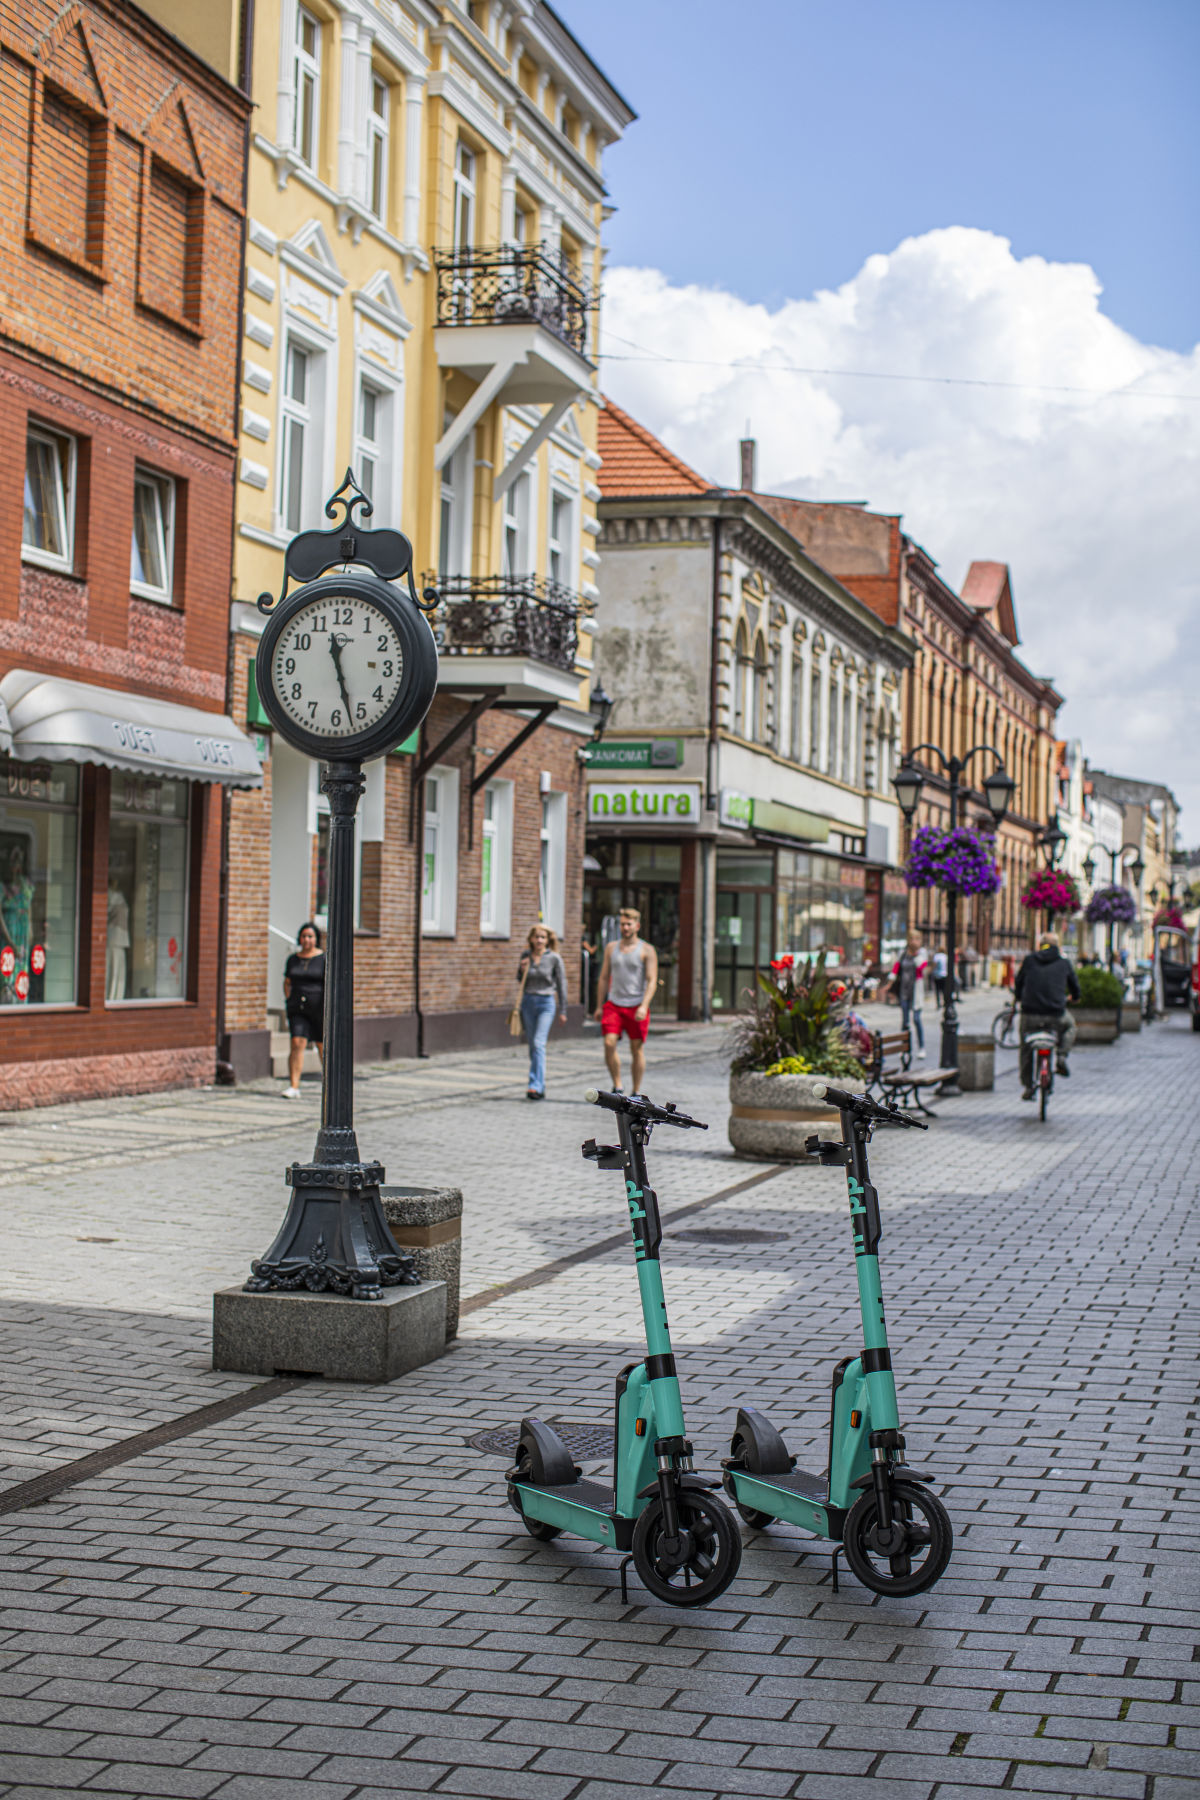  A harmonious blend of history and modernity, Września offers rich traditions, notable churches, and thriving industry. Hopp through and feel the pulse of this dynamic Polish town.